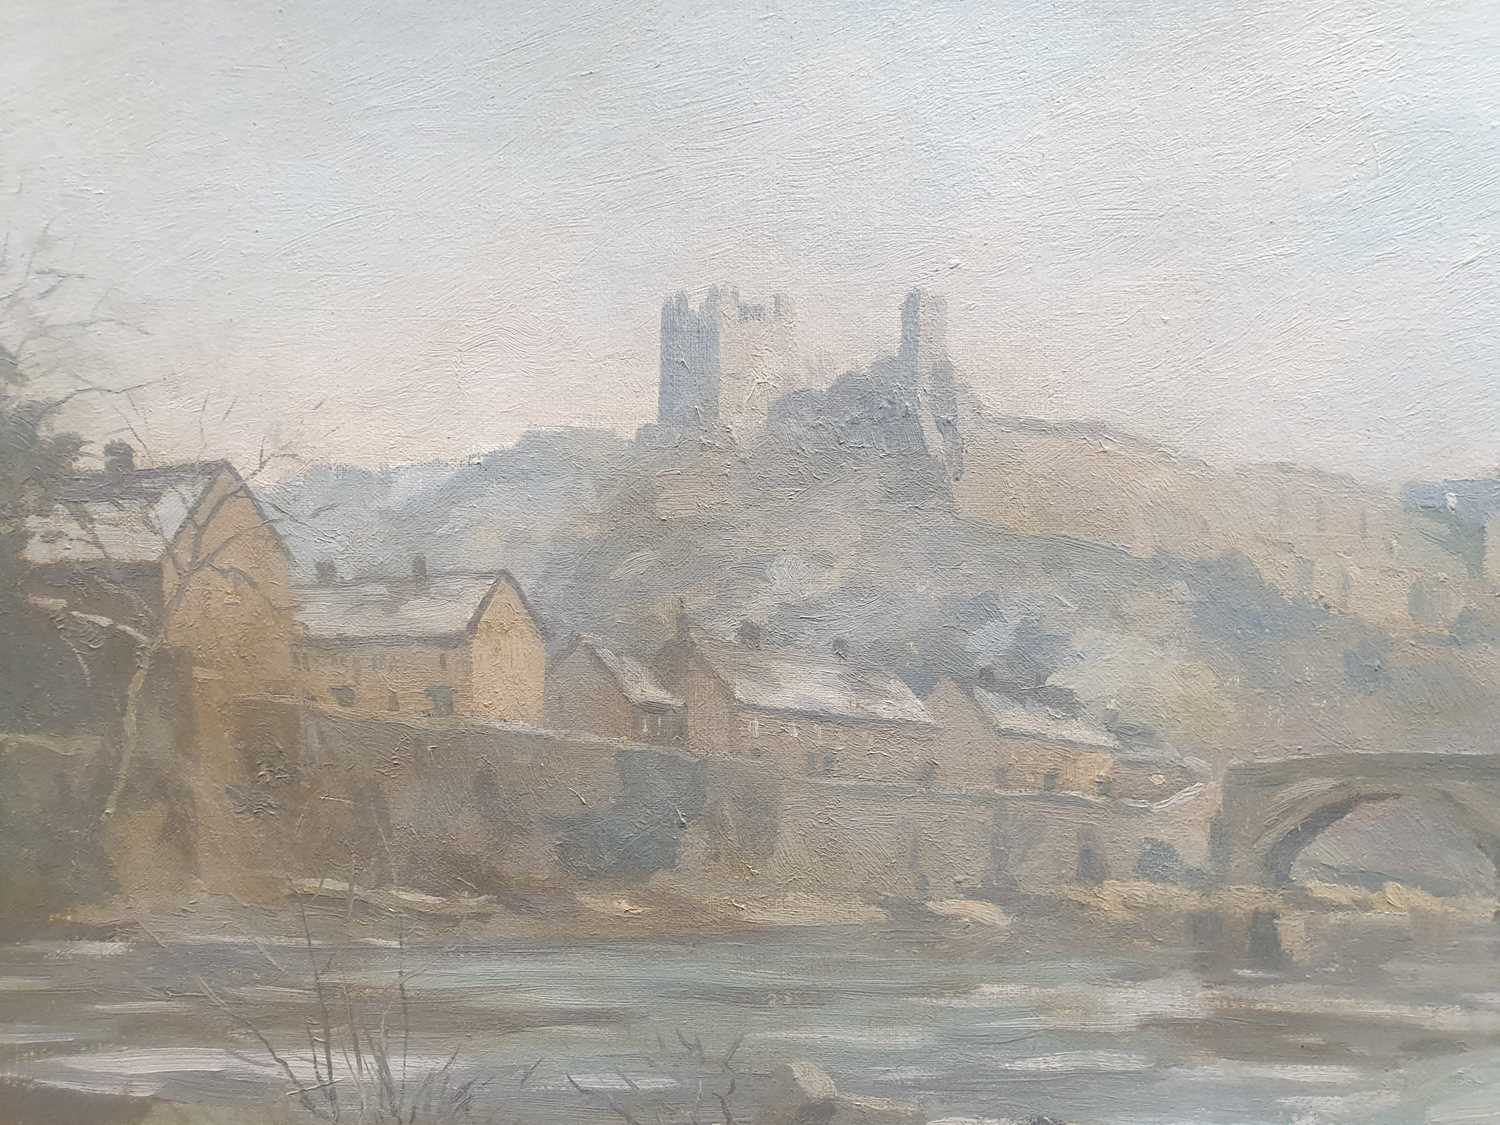 DONALD CHISHOLM TOWNER A.R.C.A (1903-1985) RICHMOND ON THE RIVER SWALE IN WINTER - Image 3 of 4